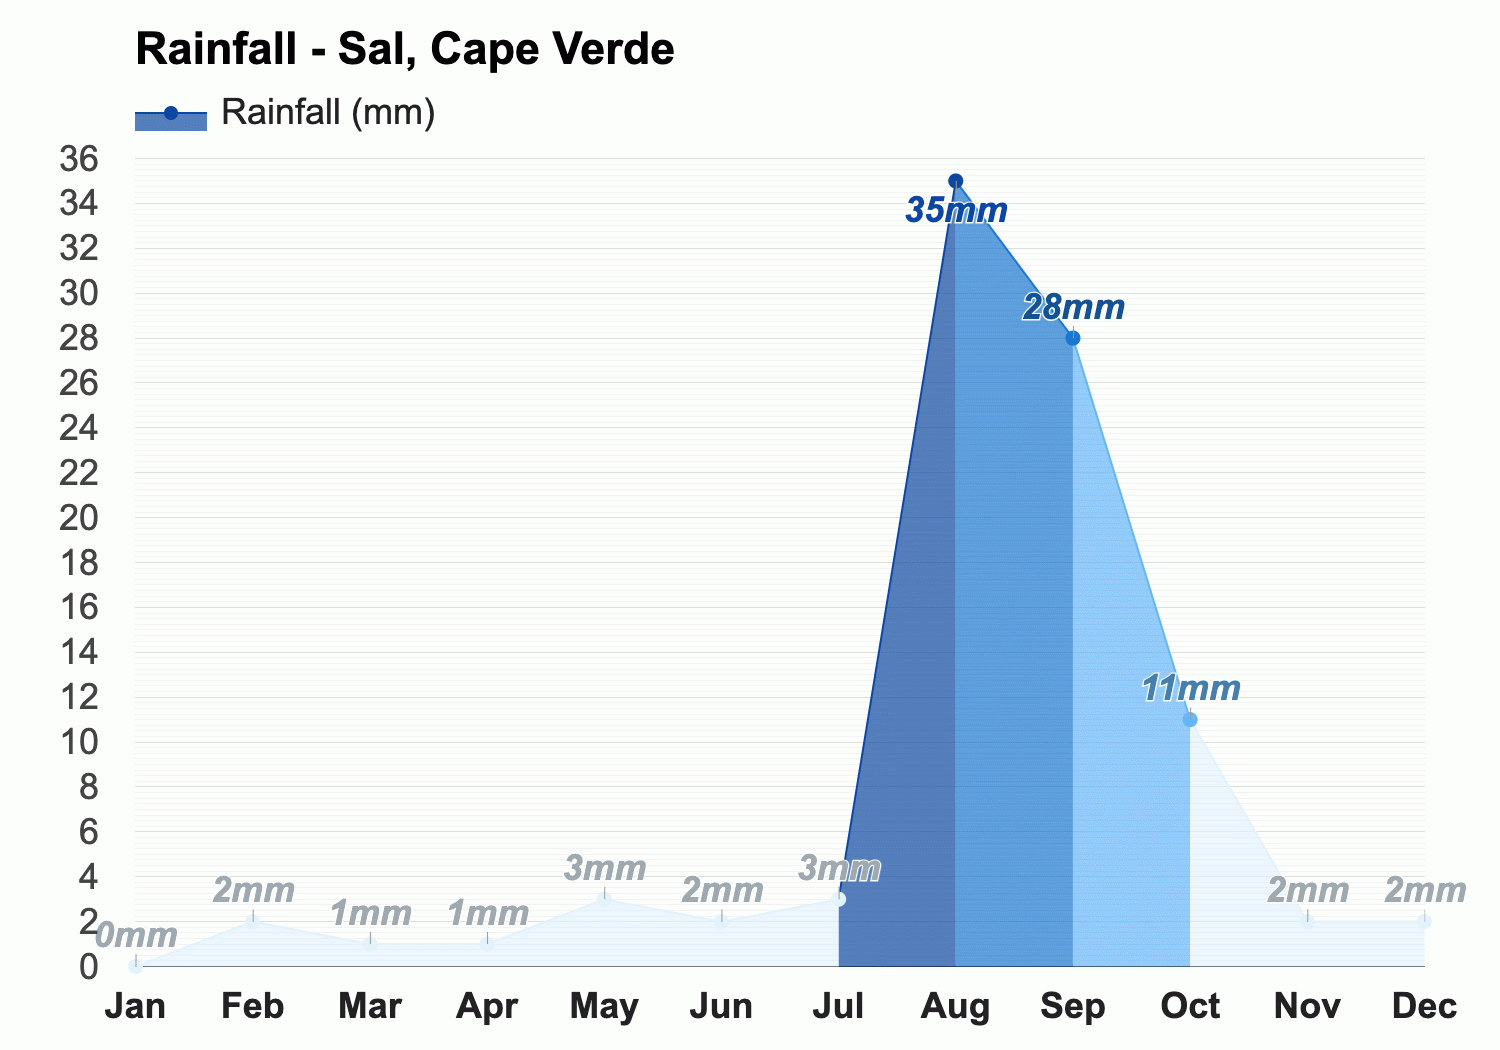 Sal, Cape Verde - Climate Monthly forecast